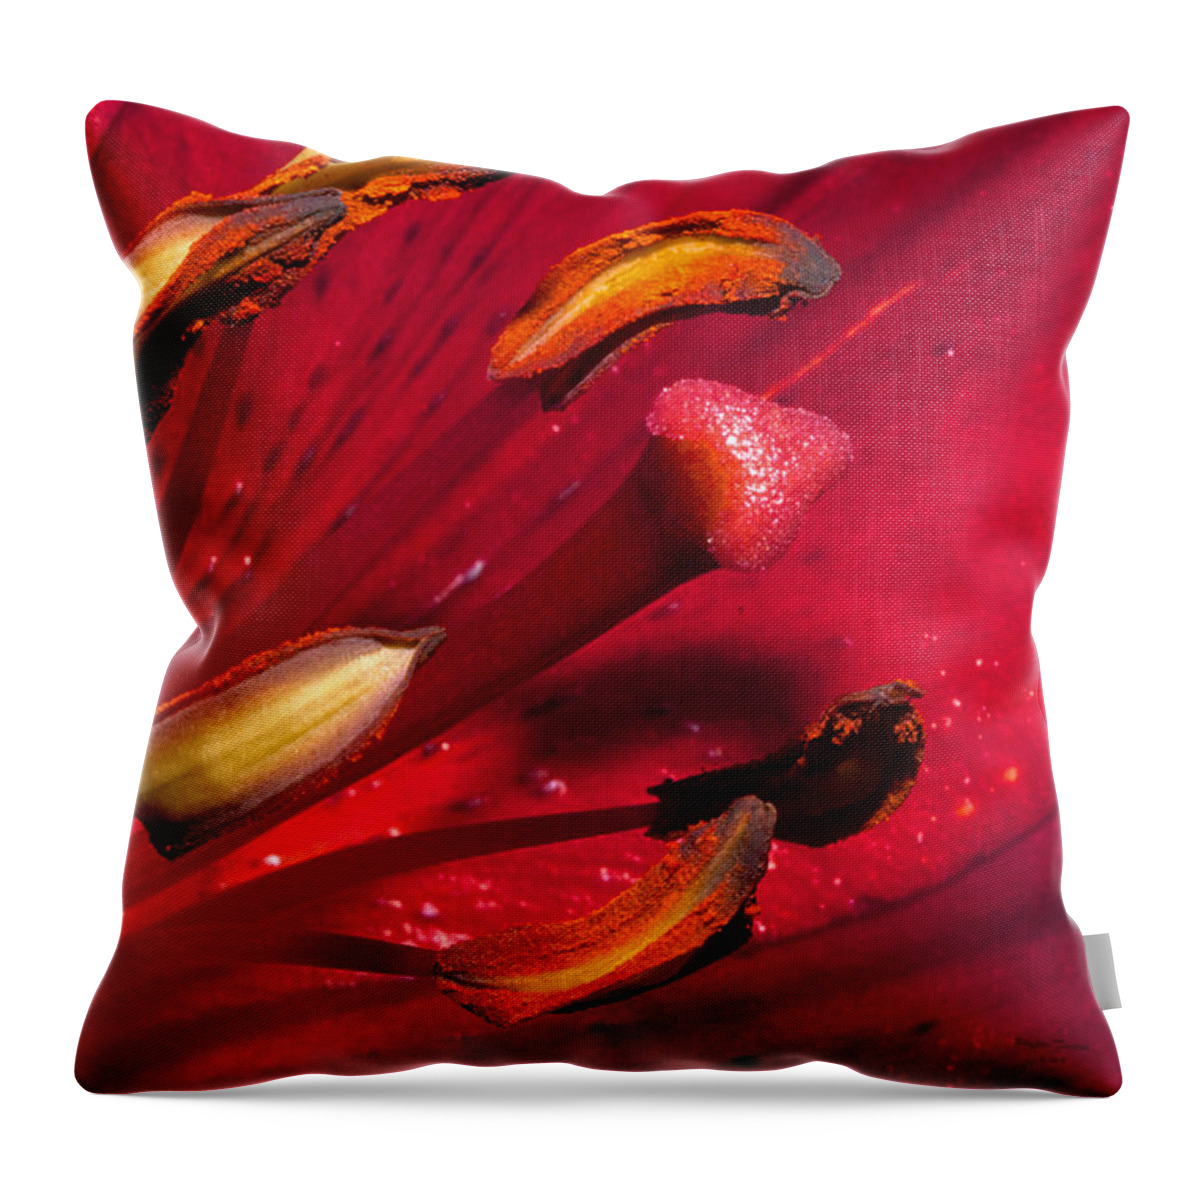 Flower Throw Pillow featuring the photograph Living Inside A Lily by Phyllis Denton